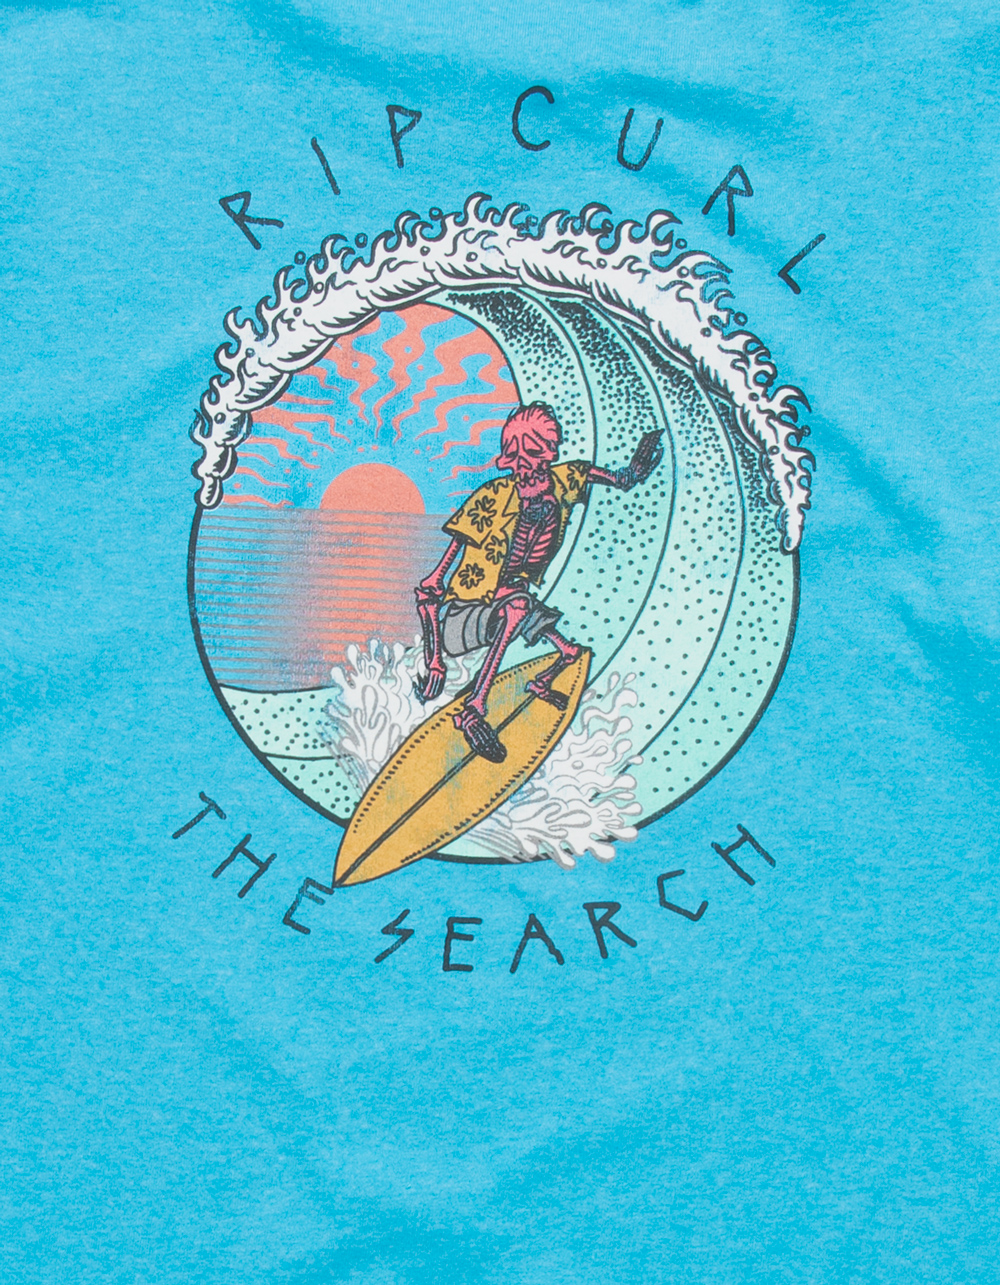 RIP CURL Dead Sled Boys Tee - TURQUOISE | Tillys